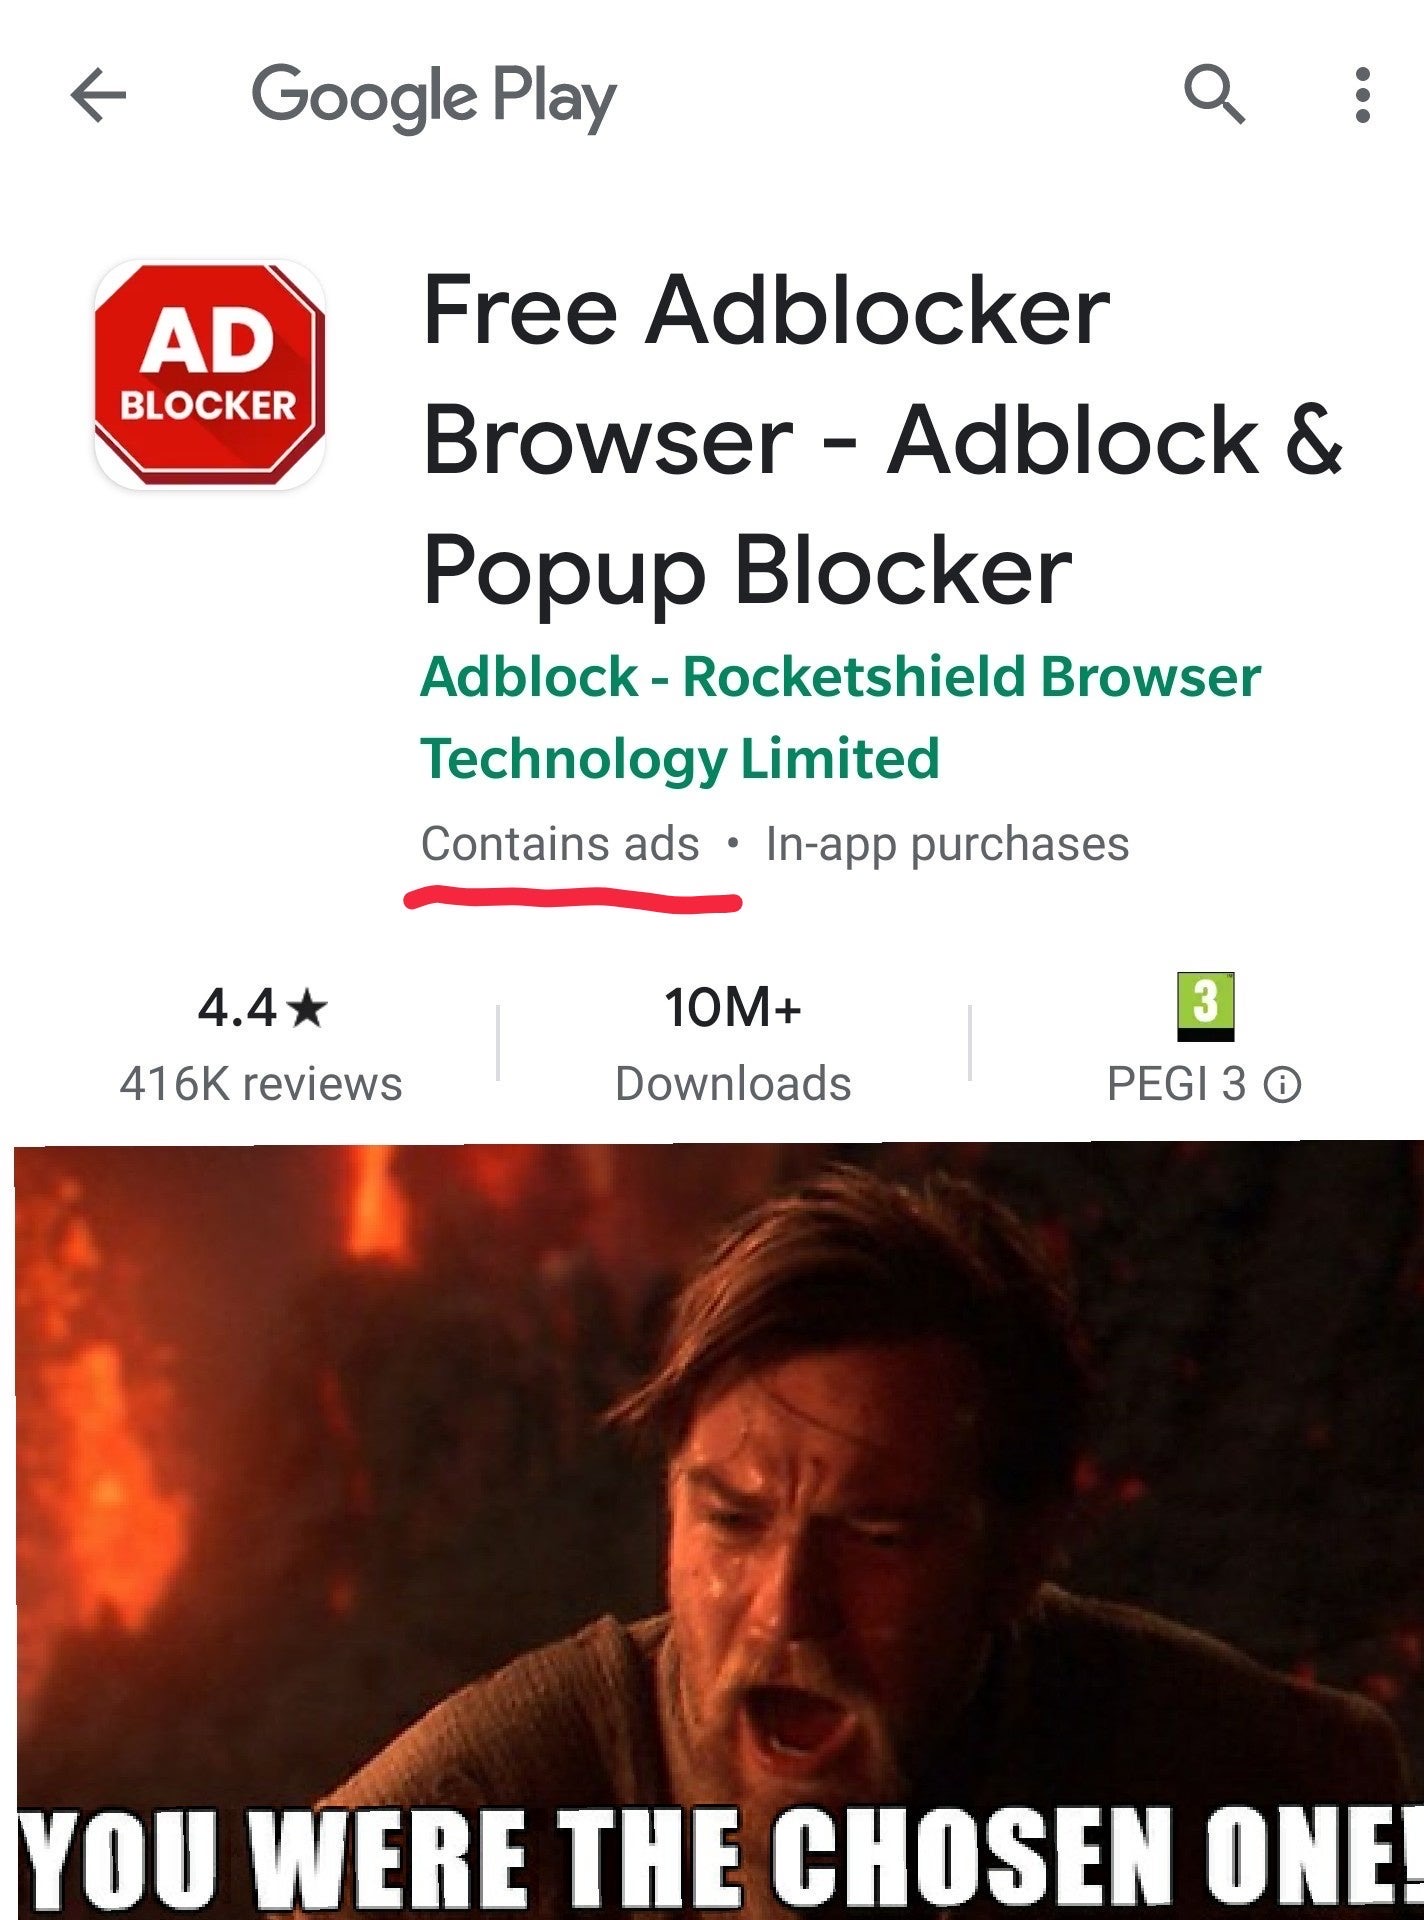 you were the chosen one - K Google Play Q Ad Blocker Free Adblocker Browser Adblock & Popup Blocker Adblock Rocketshield Browser Technology Limited Contains ads Inapp purchases 4.4 10M reviews Downloads Pegi 3 You Were The Chosen One!